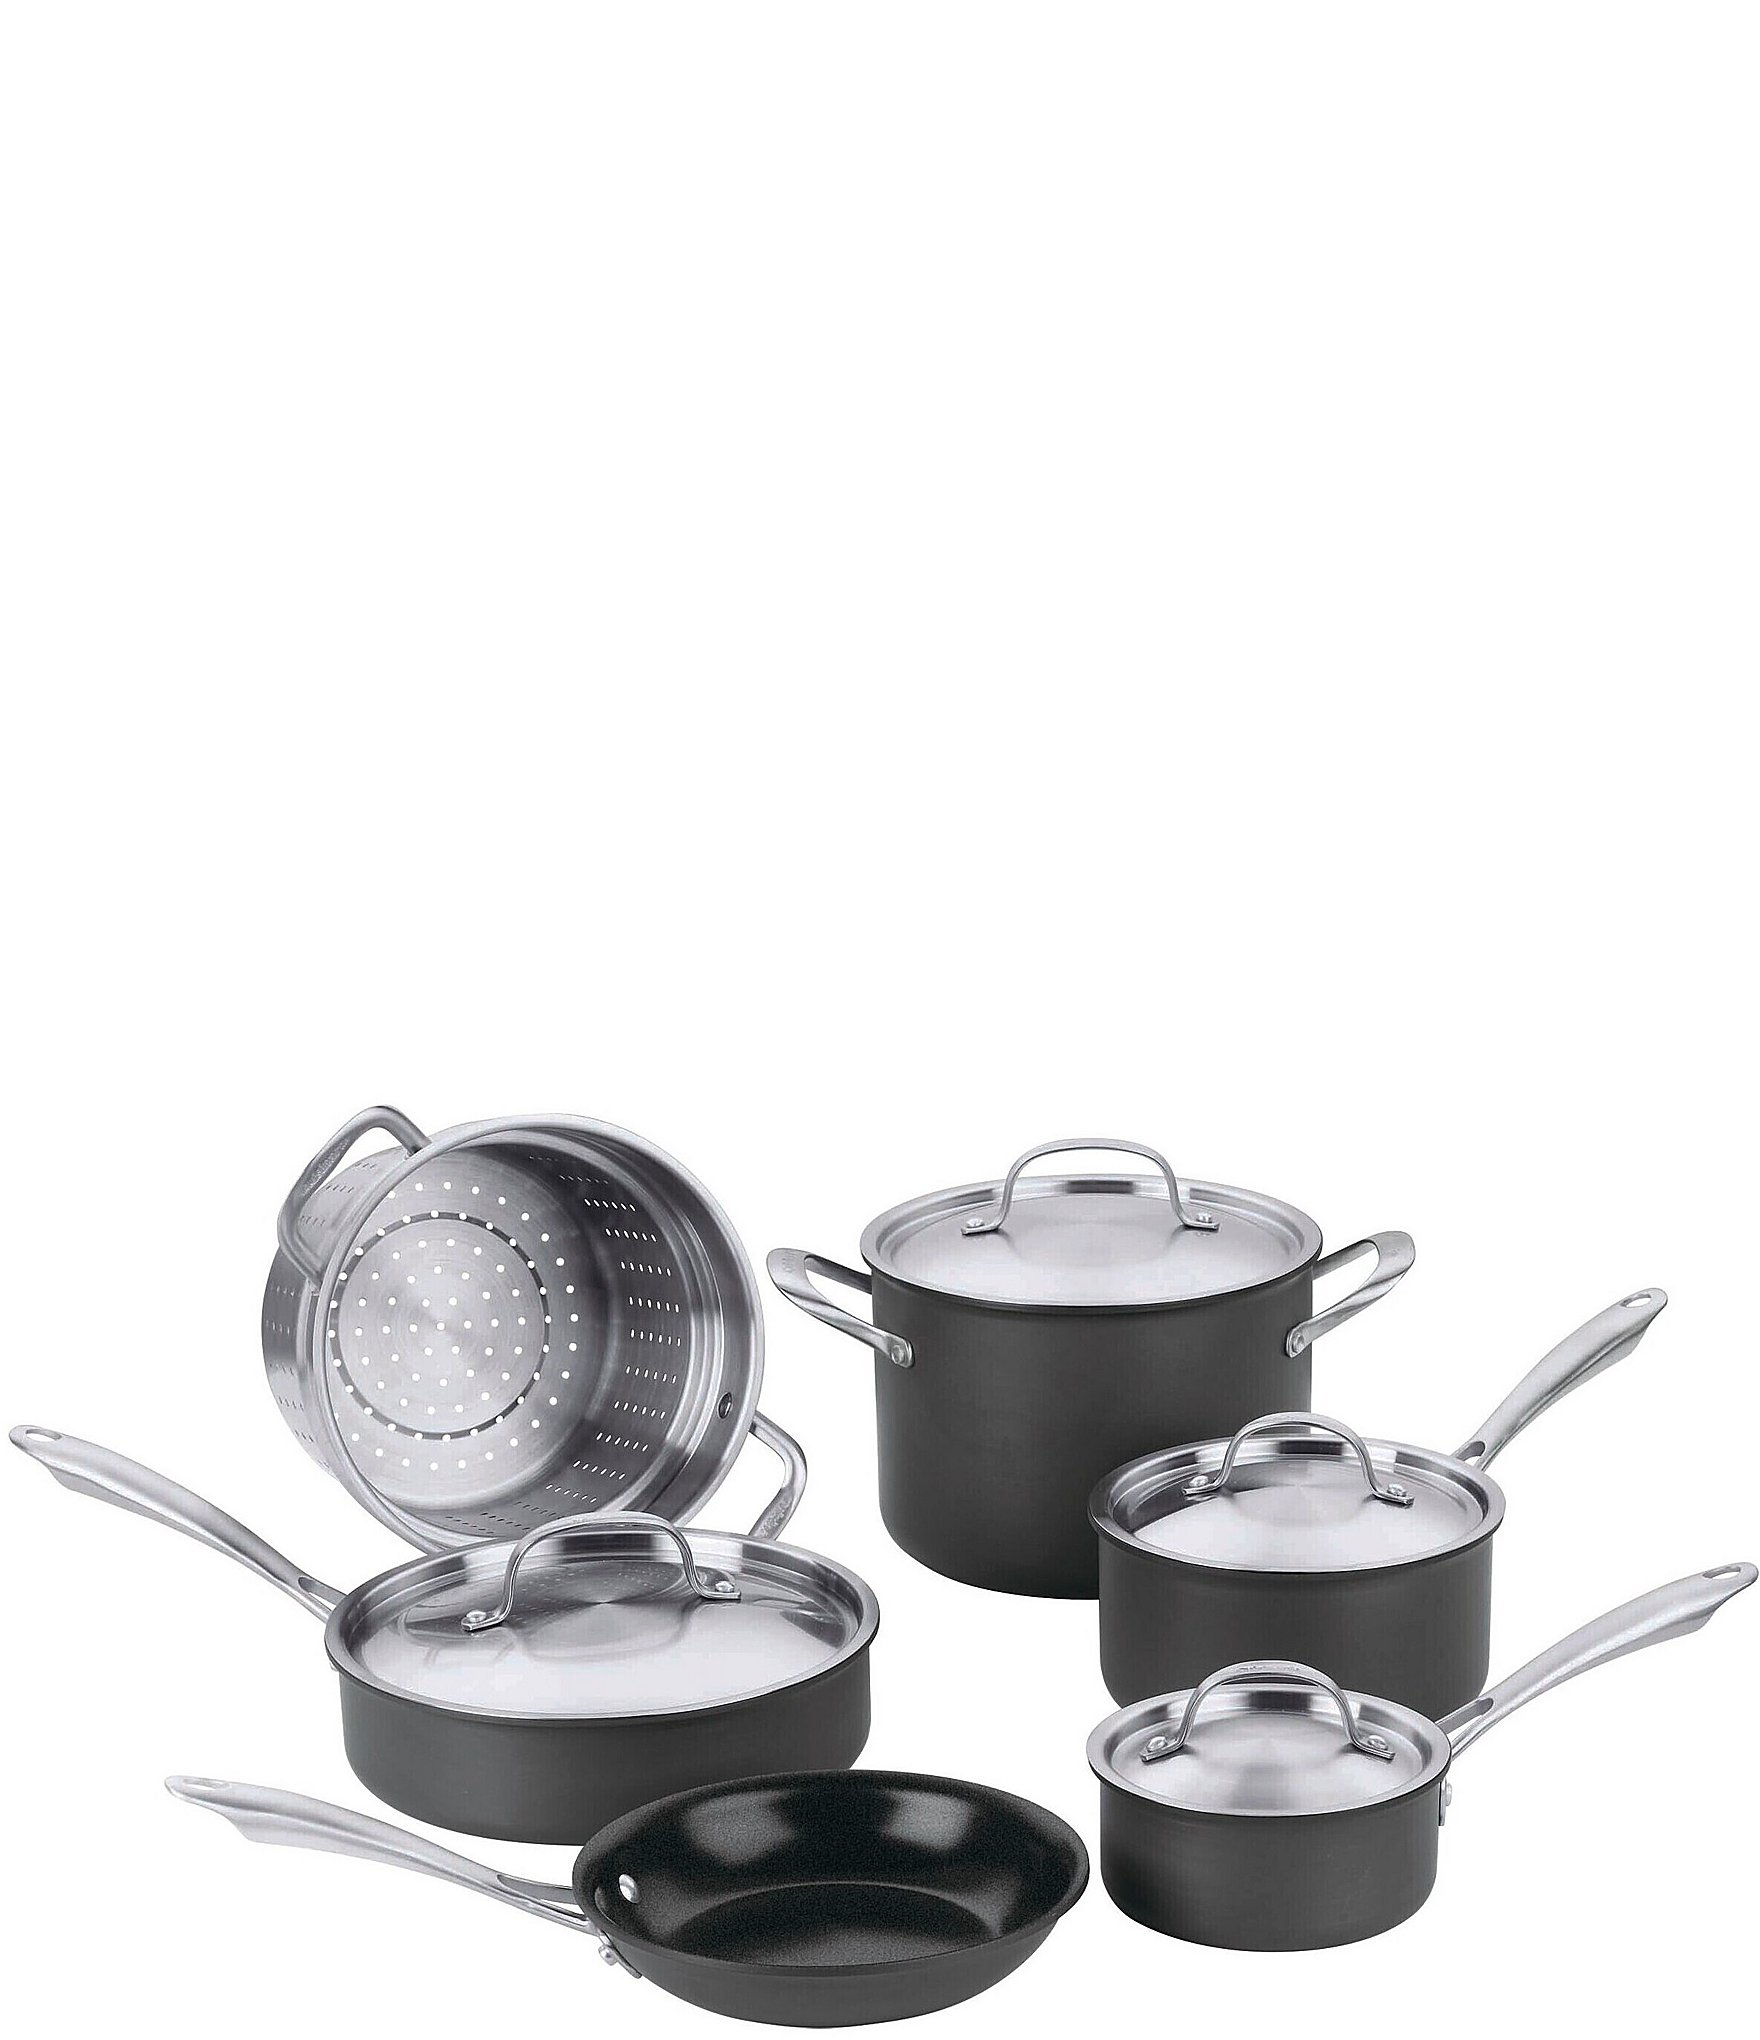 Cuisinart 3qt nonstick anodized Saucepan with glass cover